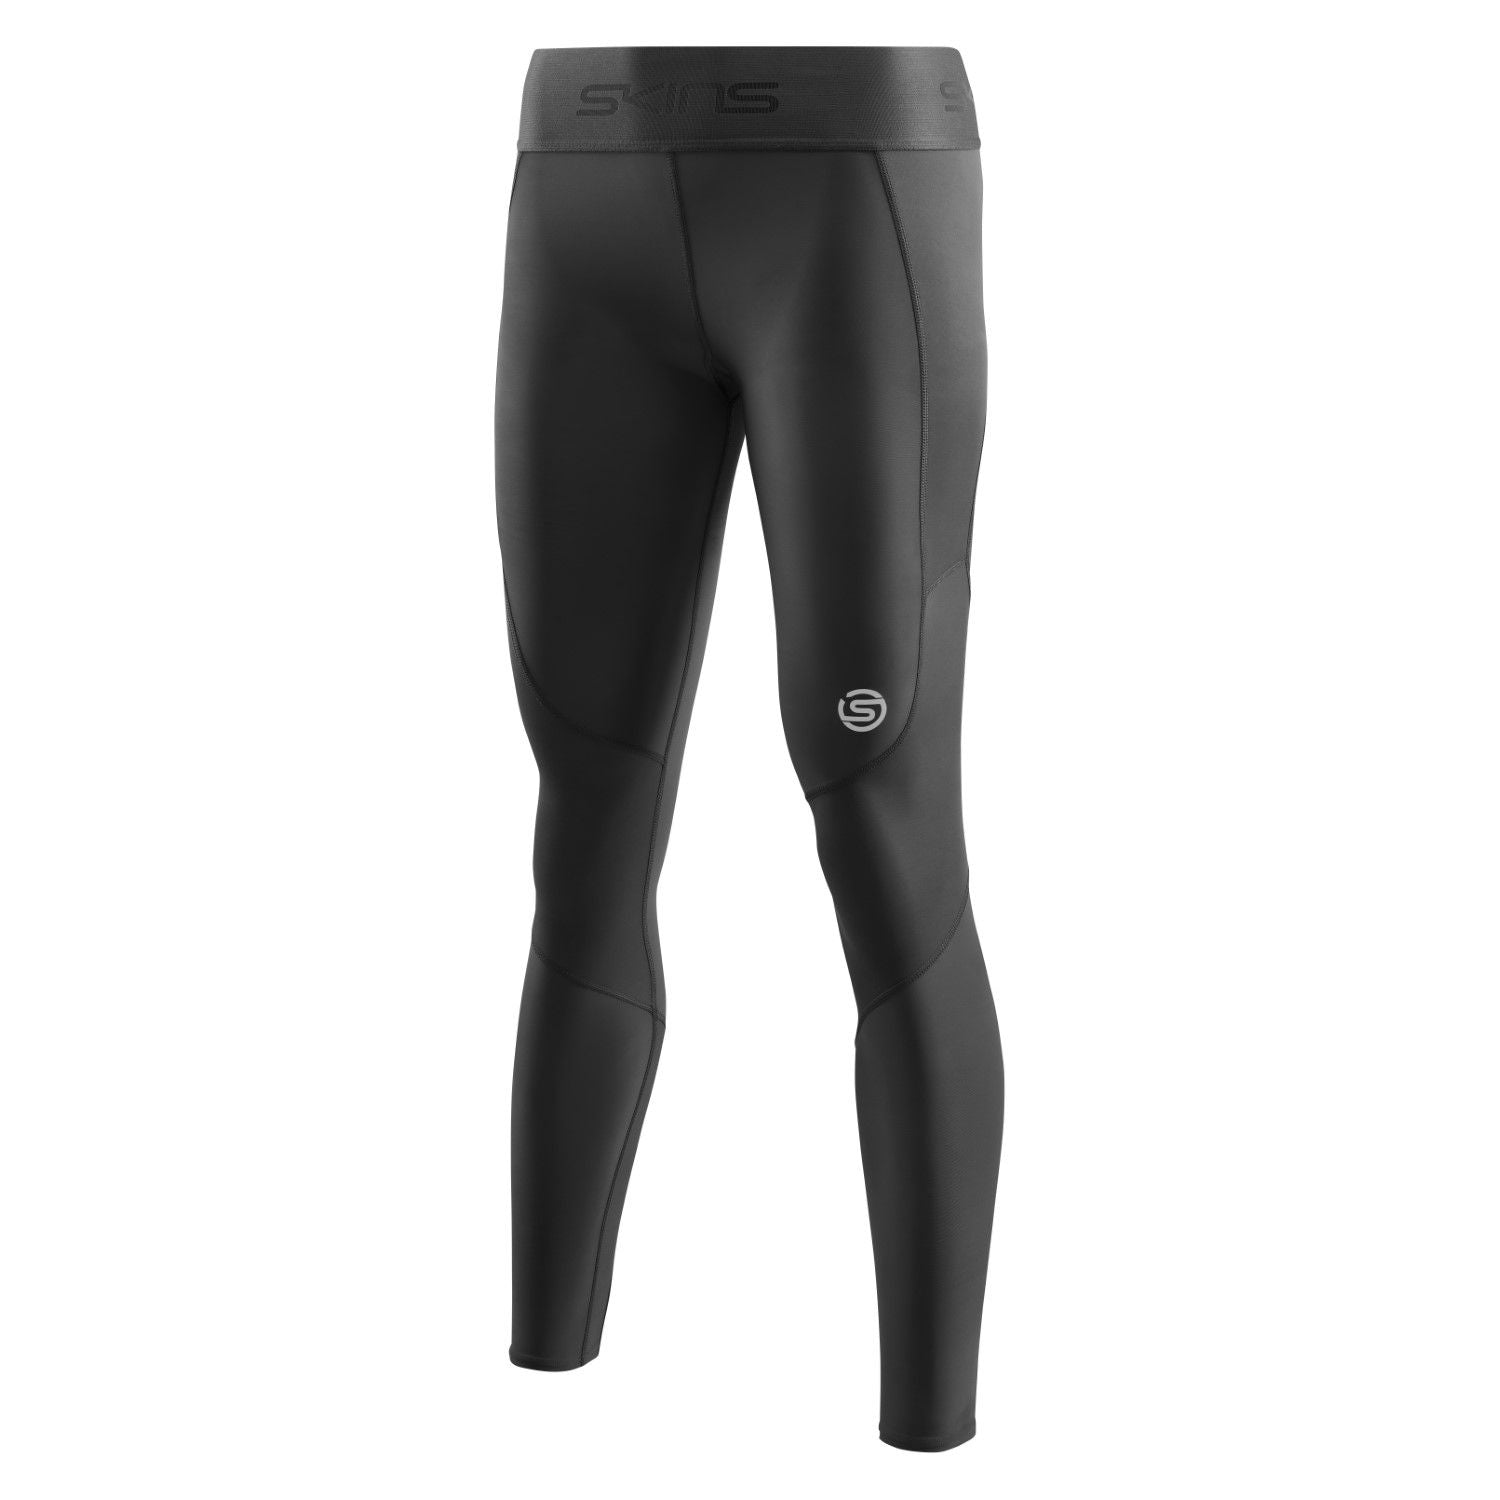 SKINS Compression Series-3 Women's 7/8 Long Tights Animal Black XS